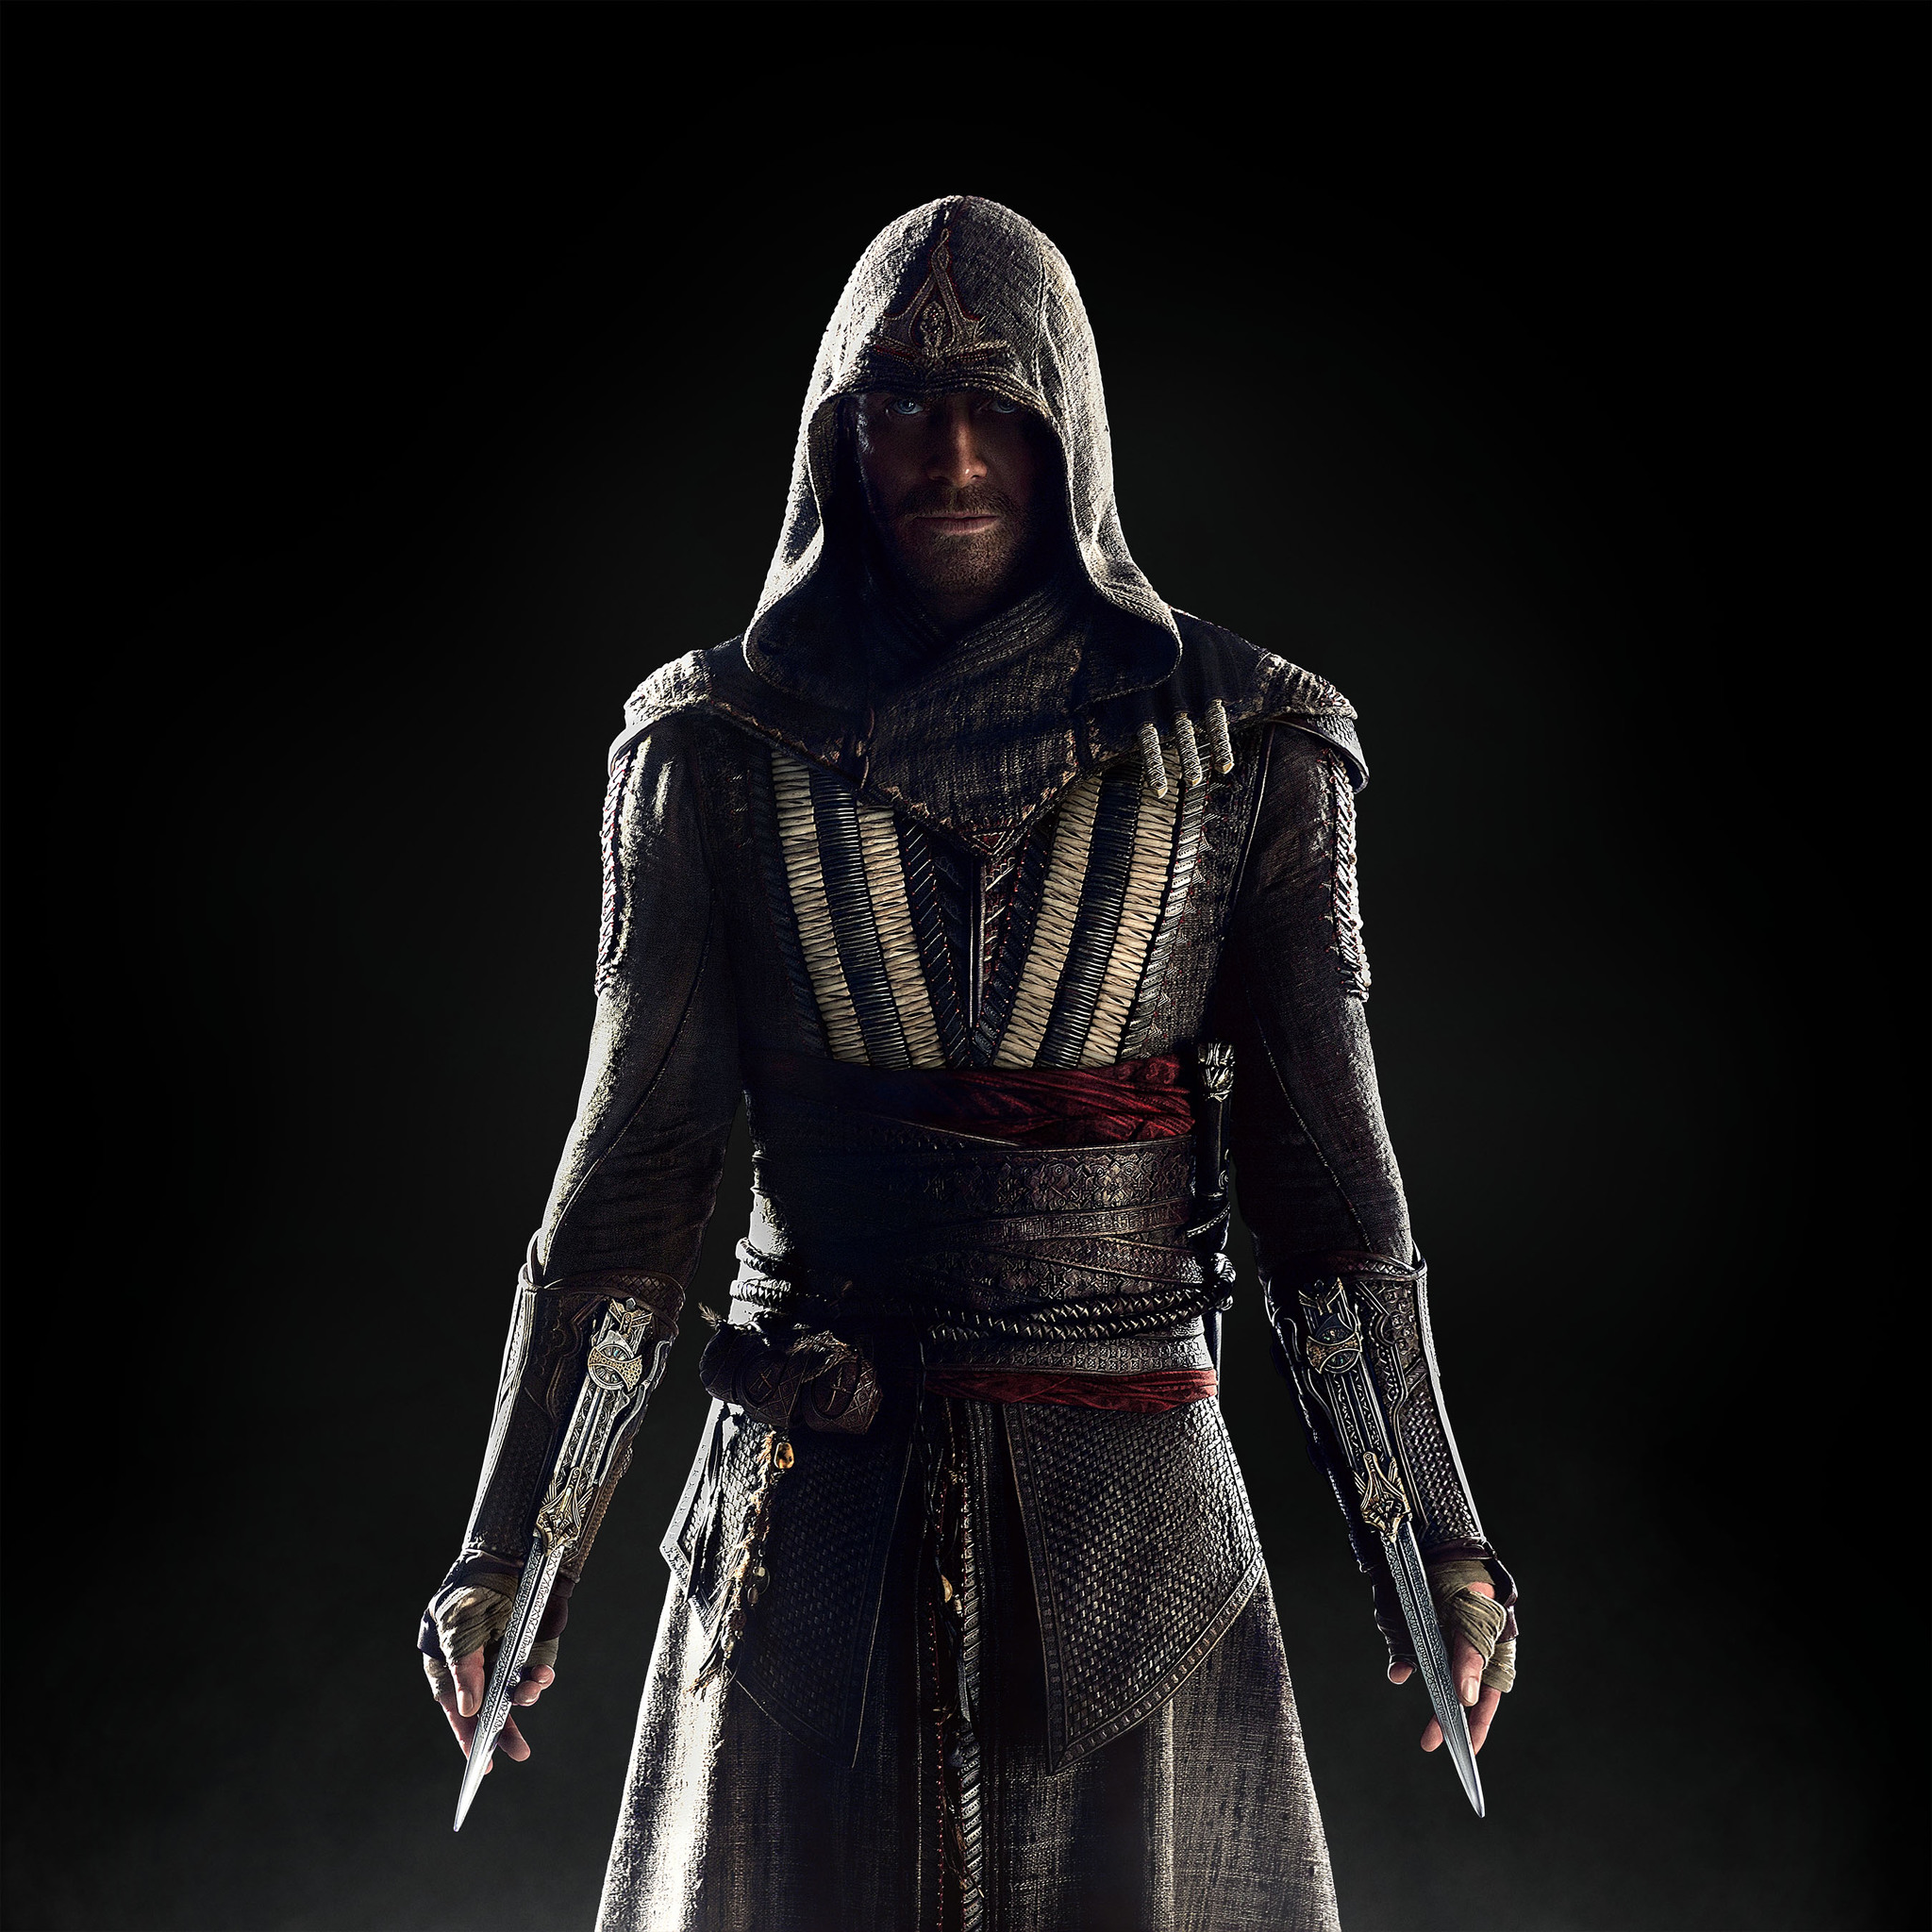 Michael Fassbender in Assassin's Creed (2016)